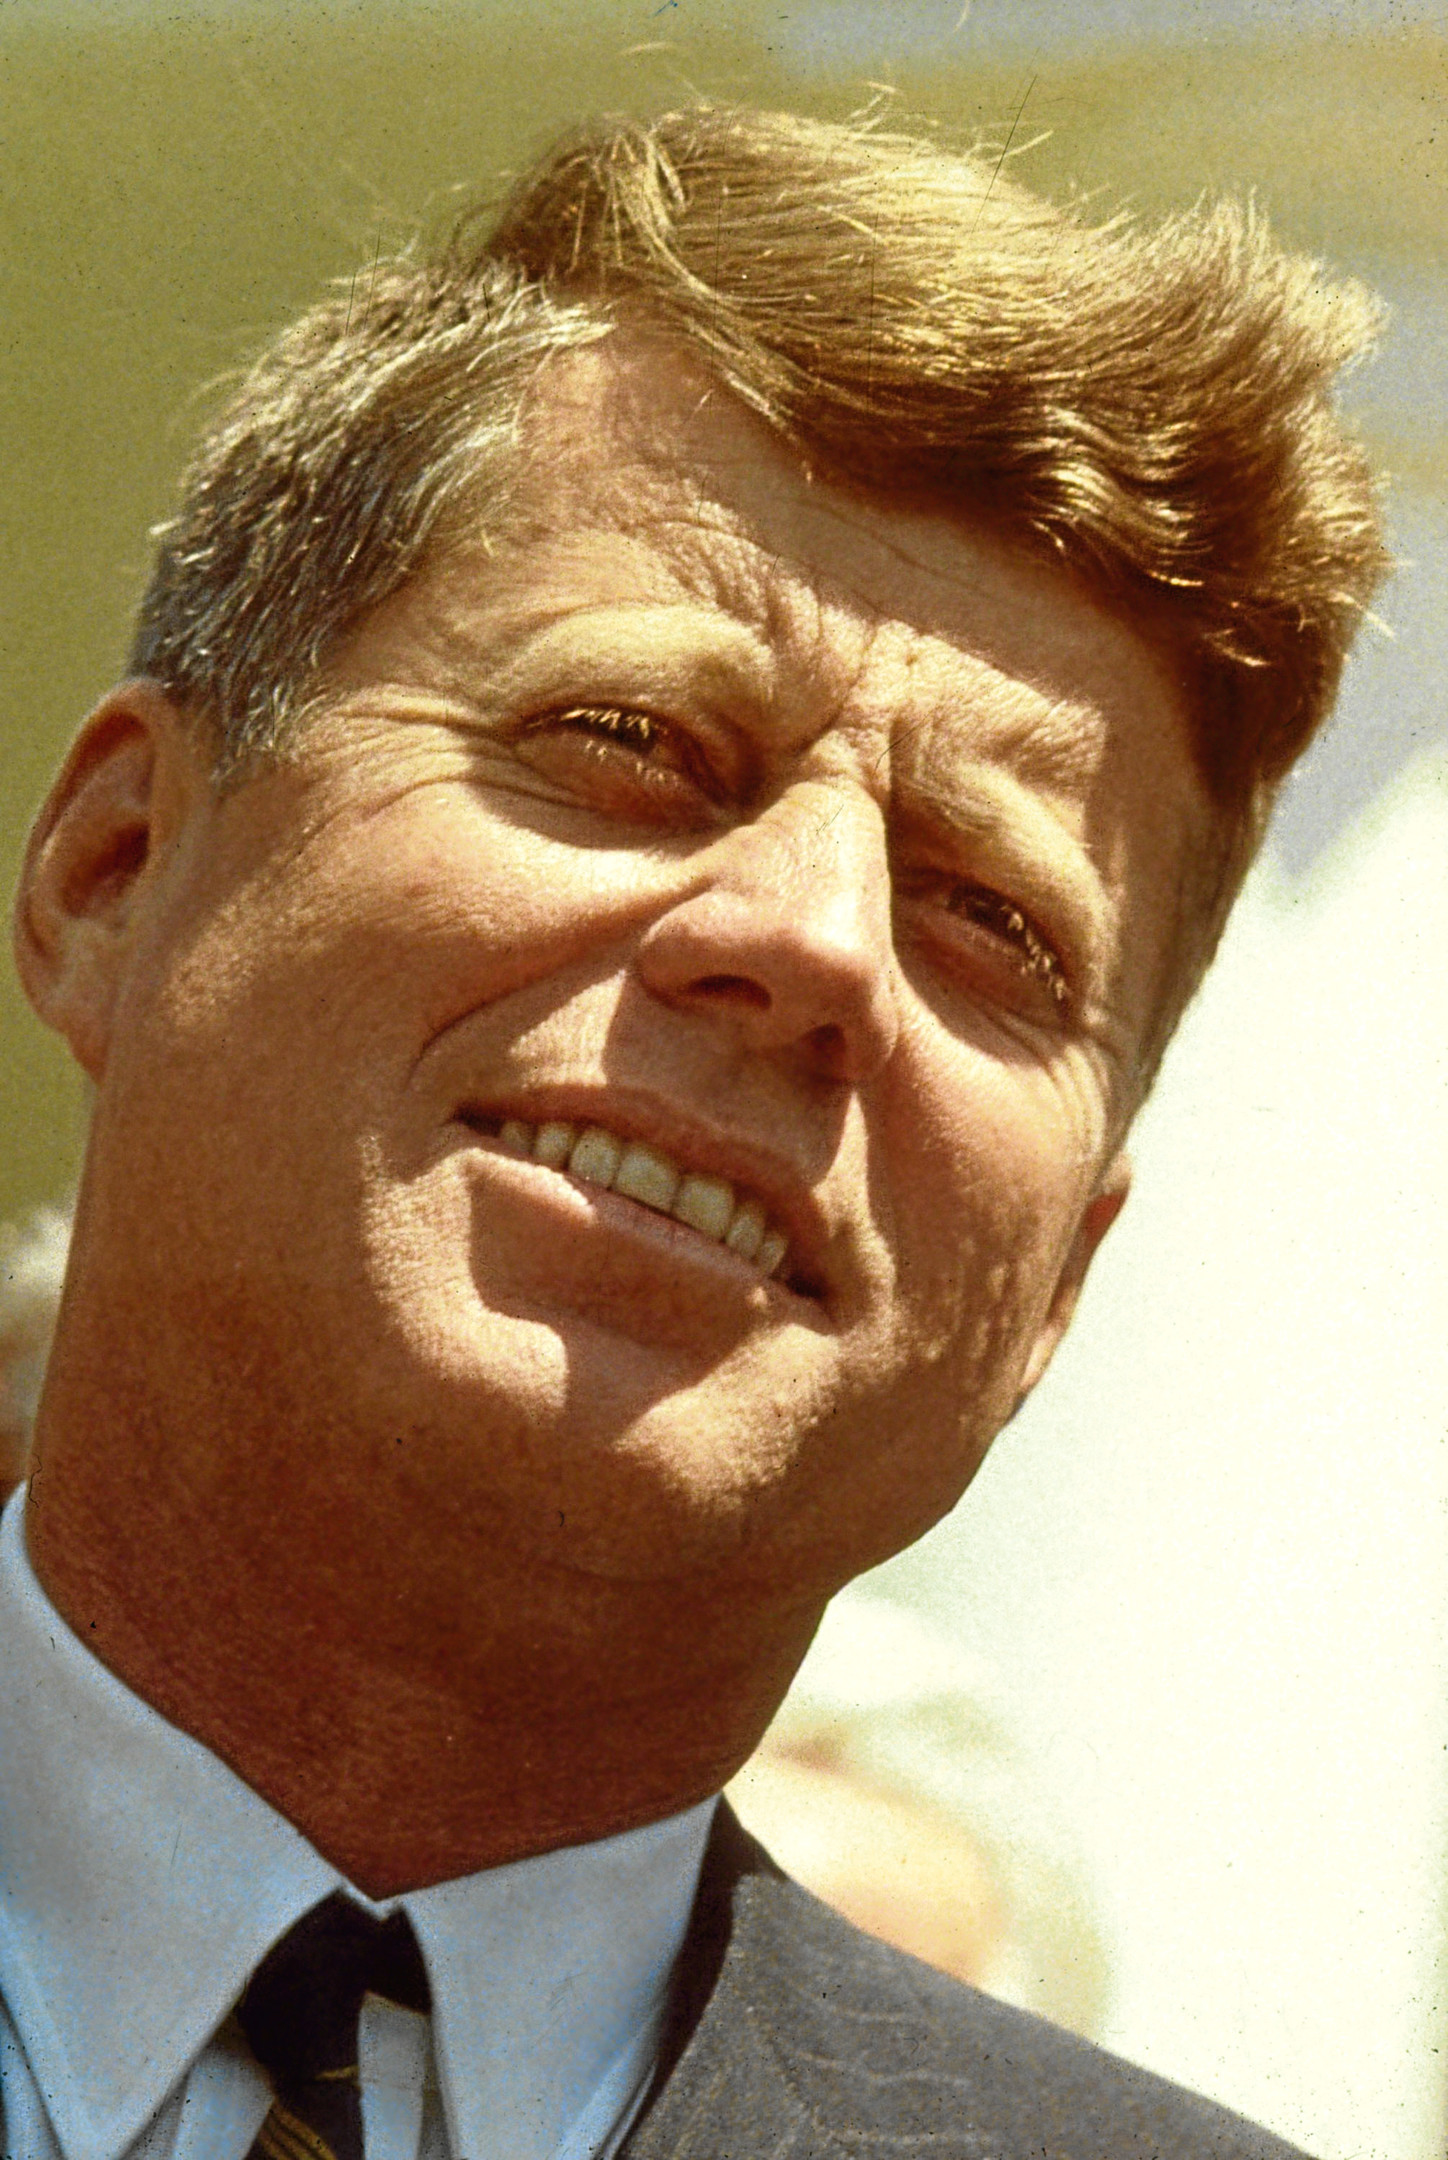 U.S. President John Fitzgerald Kennedy is shown in this 1960 photograph (Photo by Getty Images)